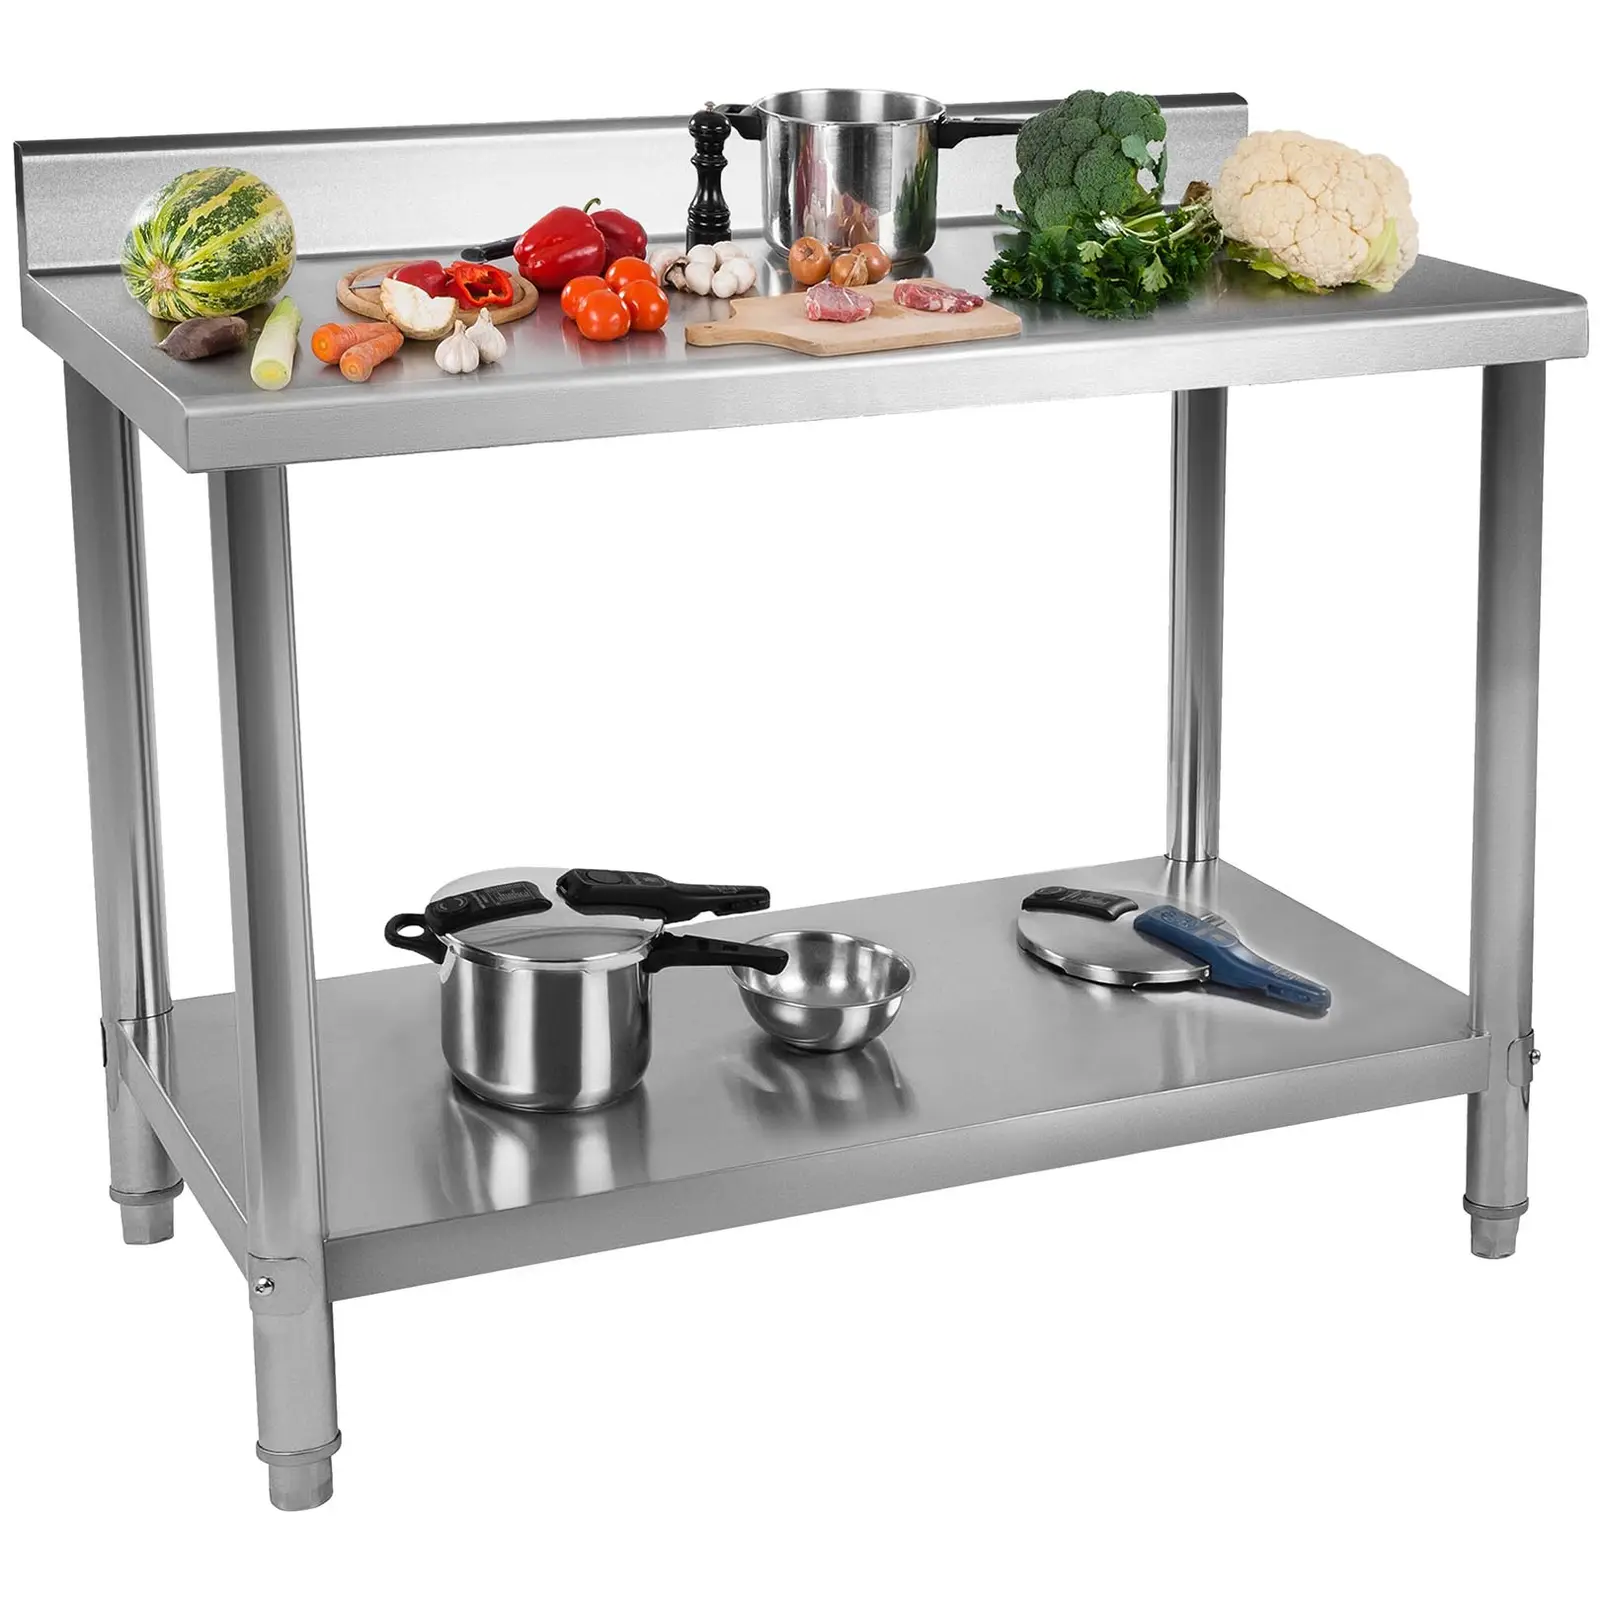 Stainless Steel Work Table - 120 x 60 cm - upstand - 137 kg carrying capacity